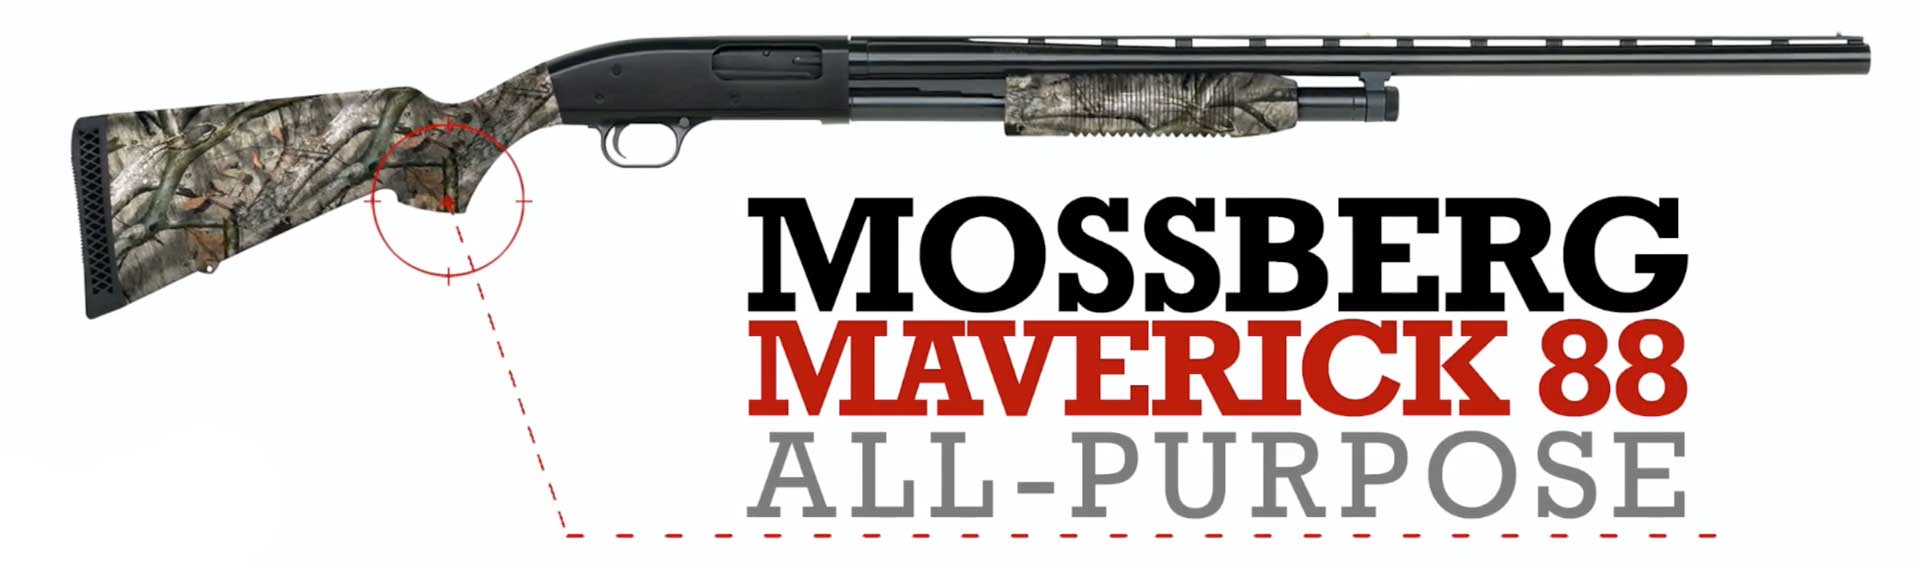 right side pump-action shotgun black metal camouflage stock text on image noting "Mossberg Maverick 88 All-Purpose"